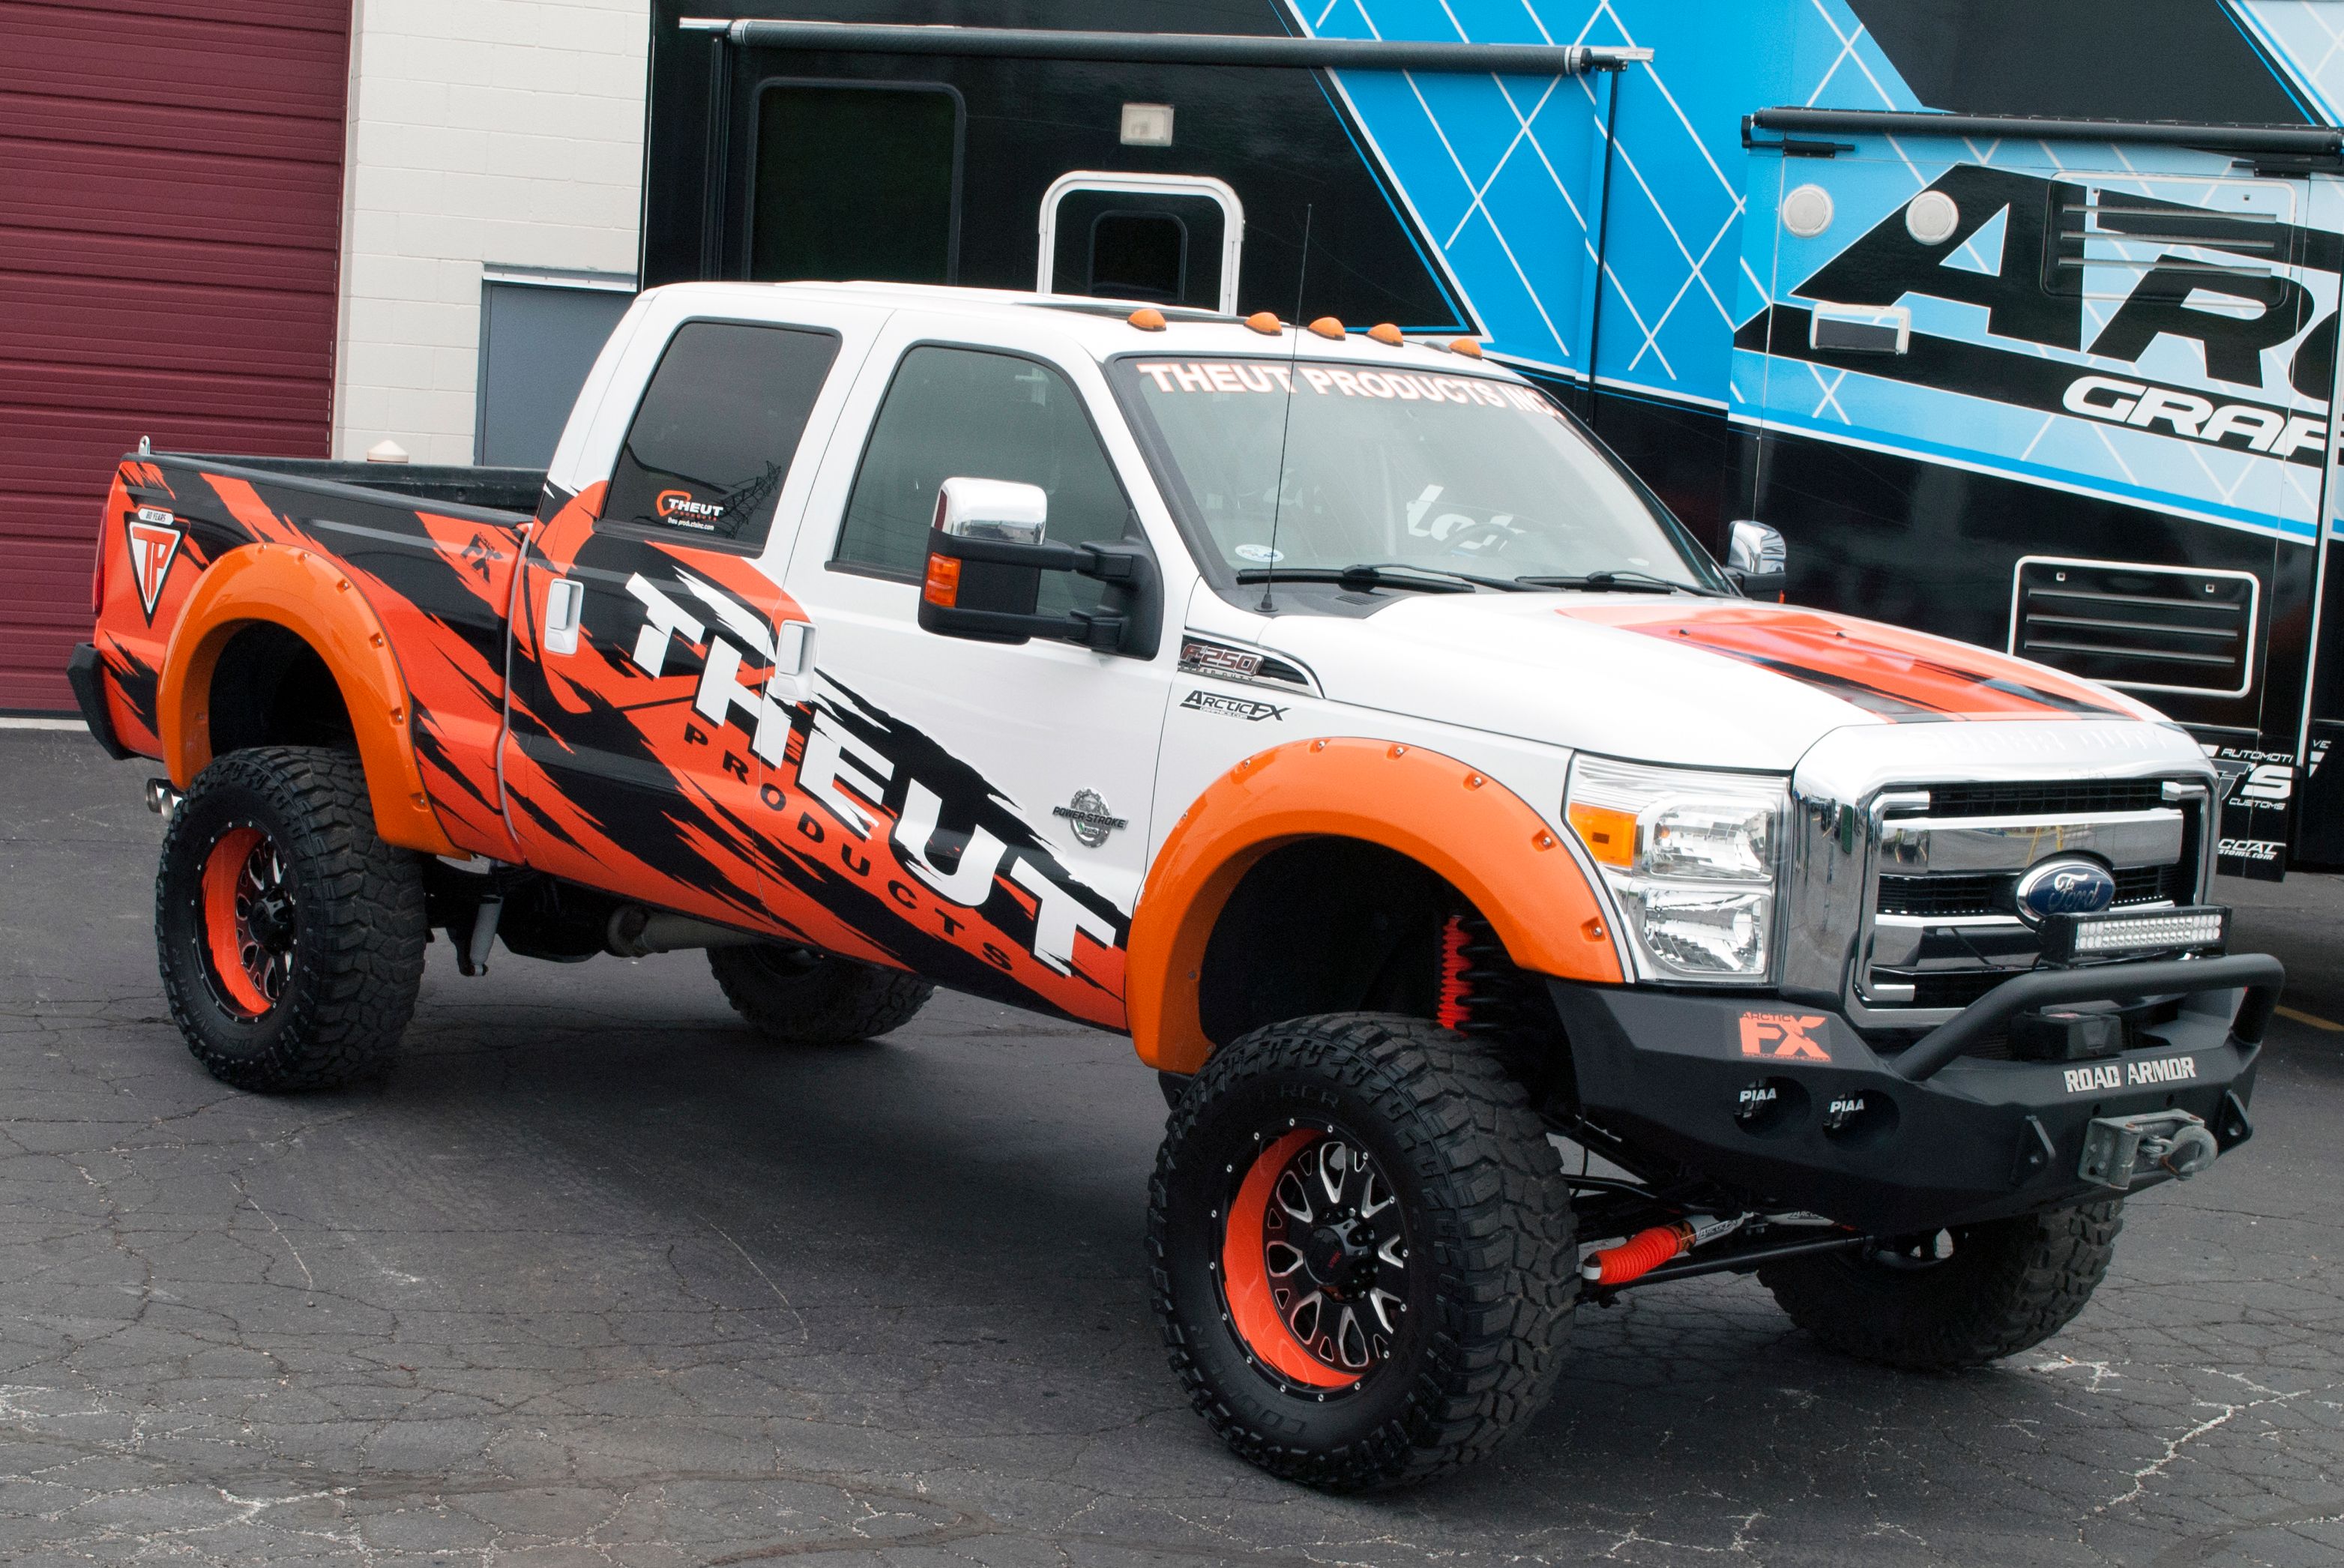 A commercial work truck with a custom vinyl wrap with orange, white, and black logos and text with a grunge design